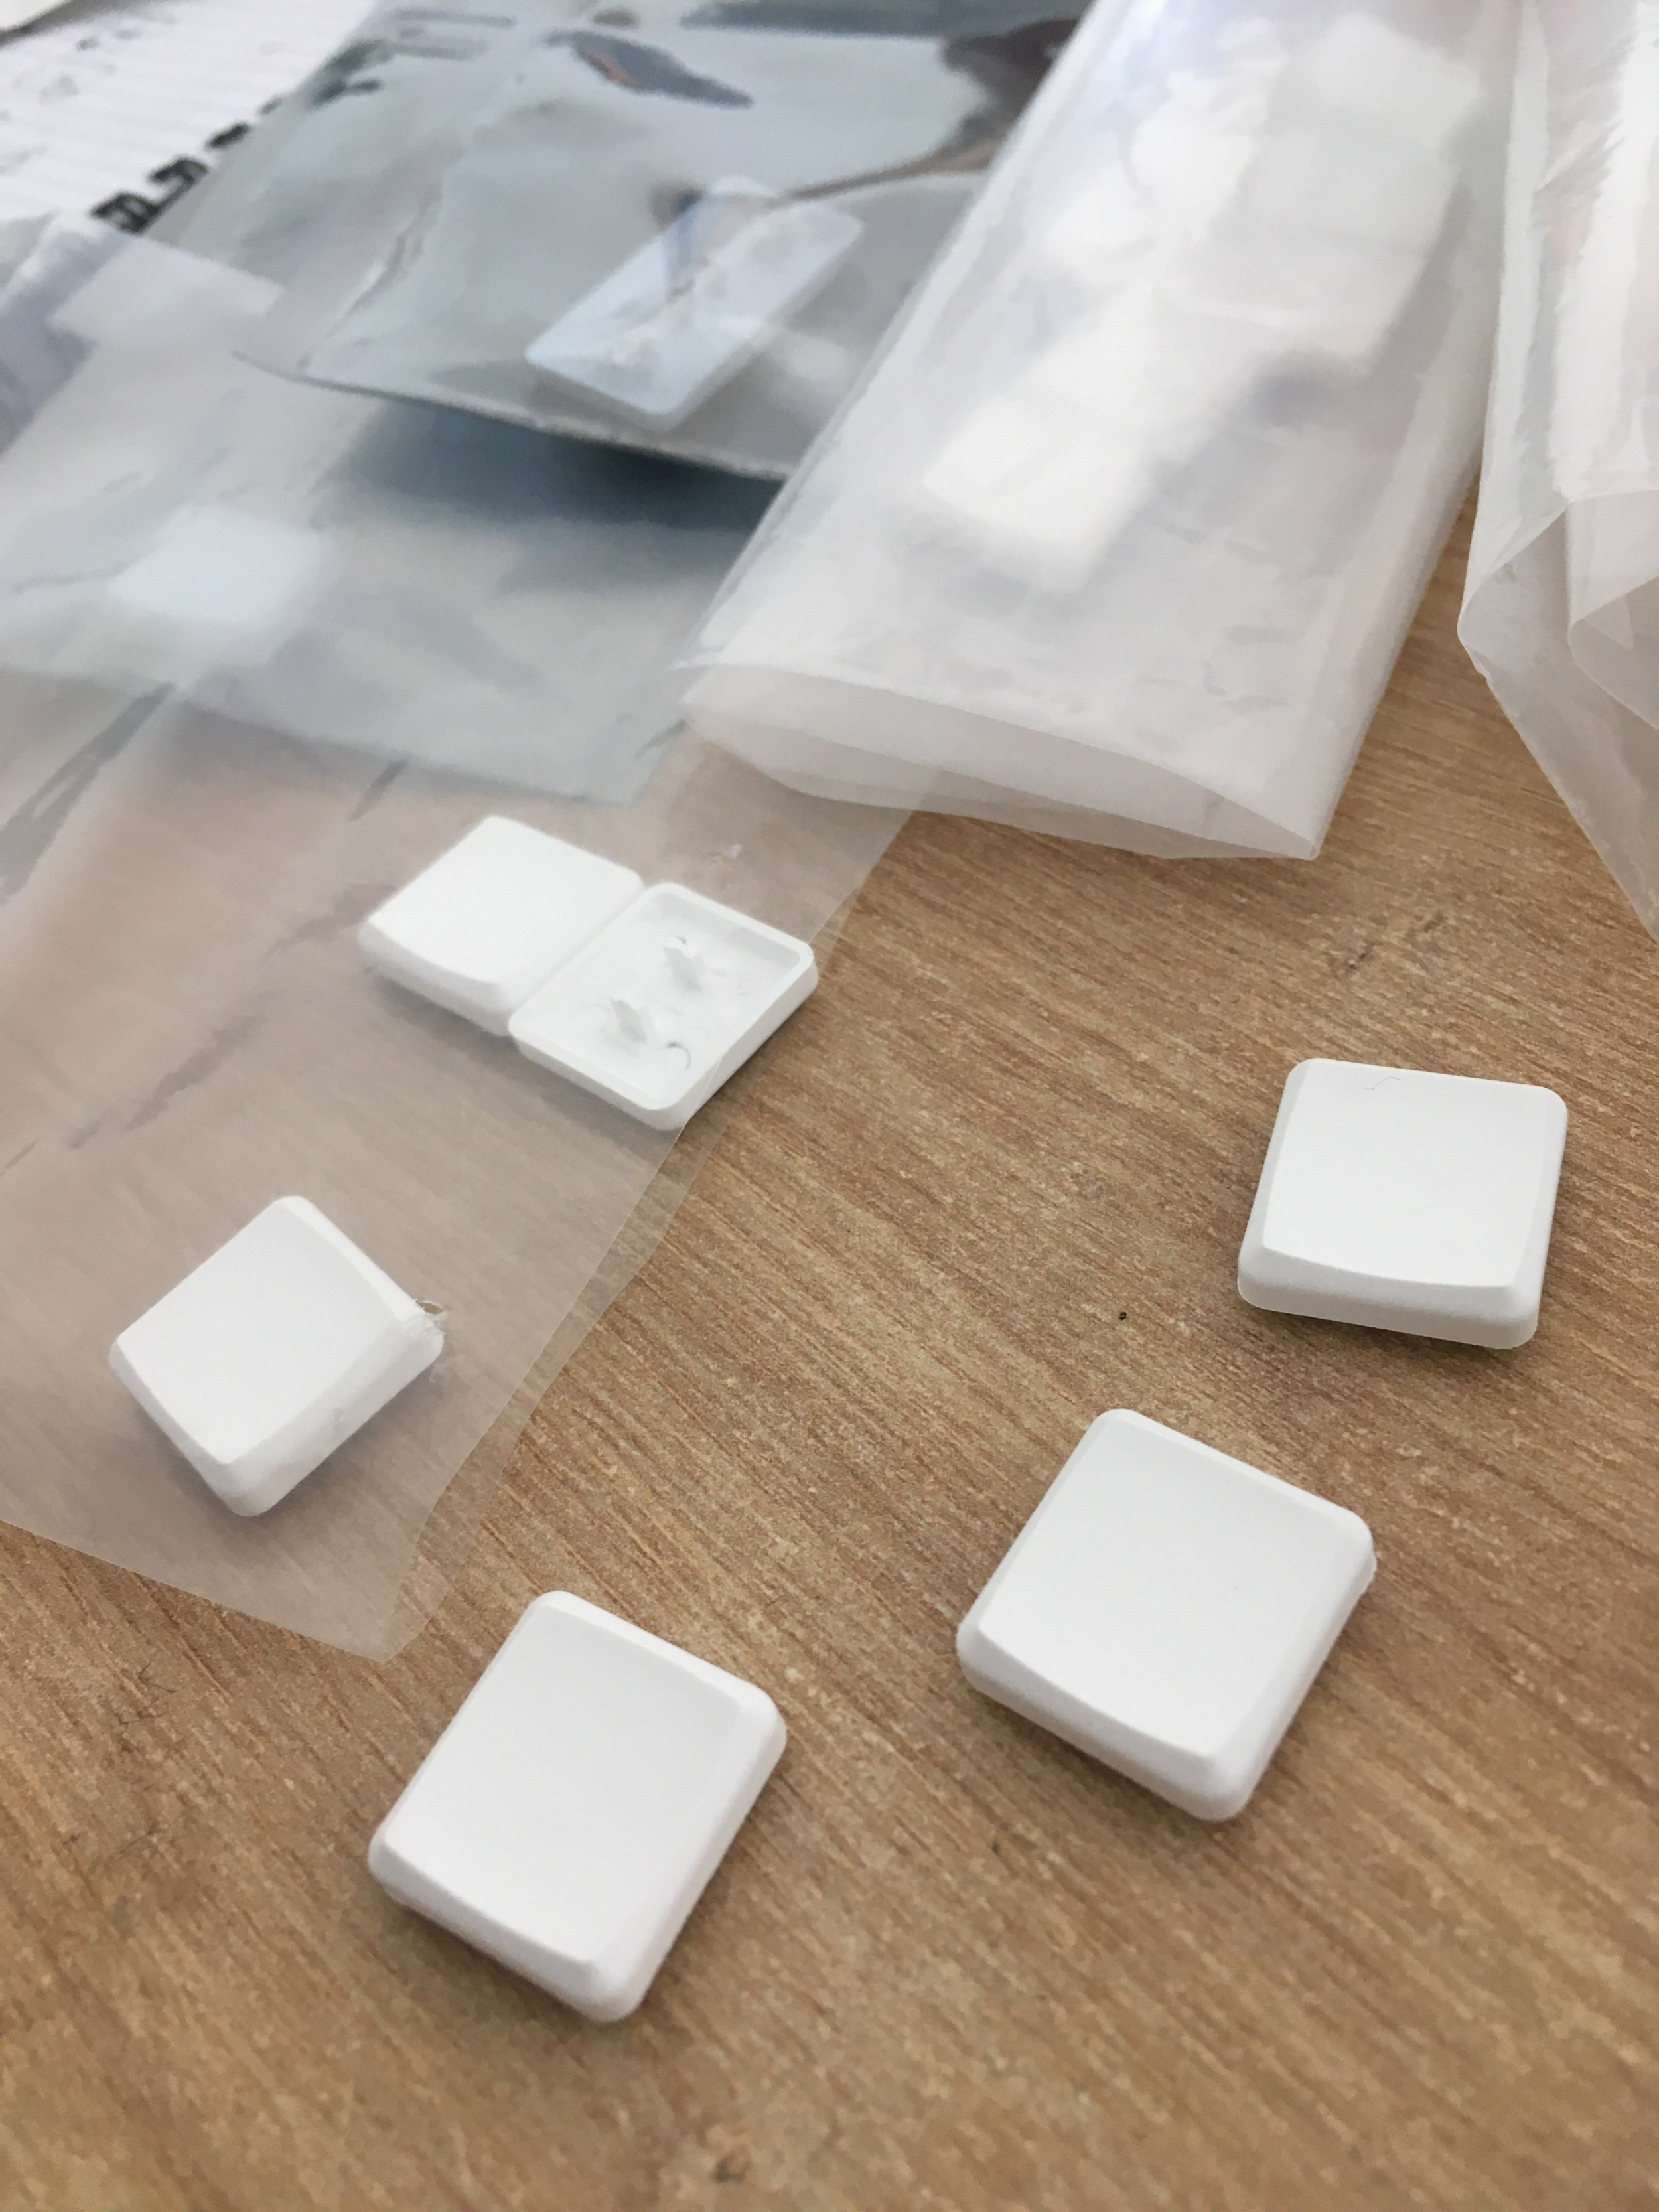 A production sample of the MBK Choc Keycaps.